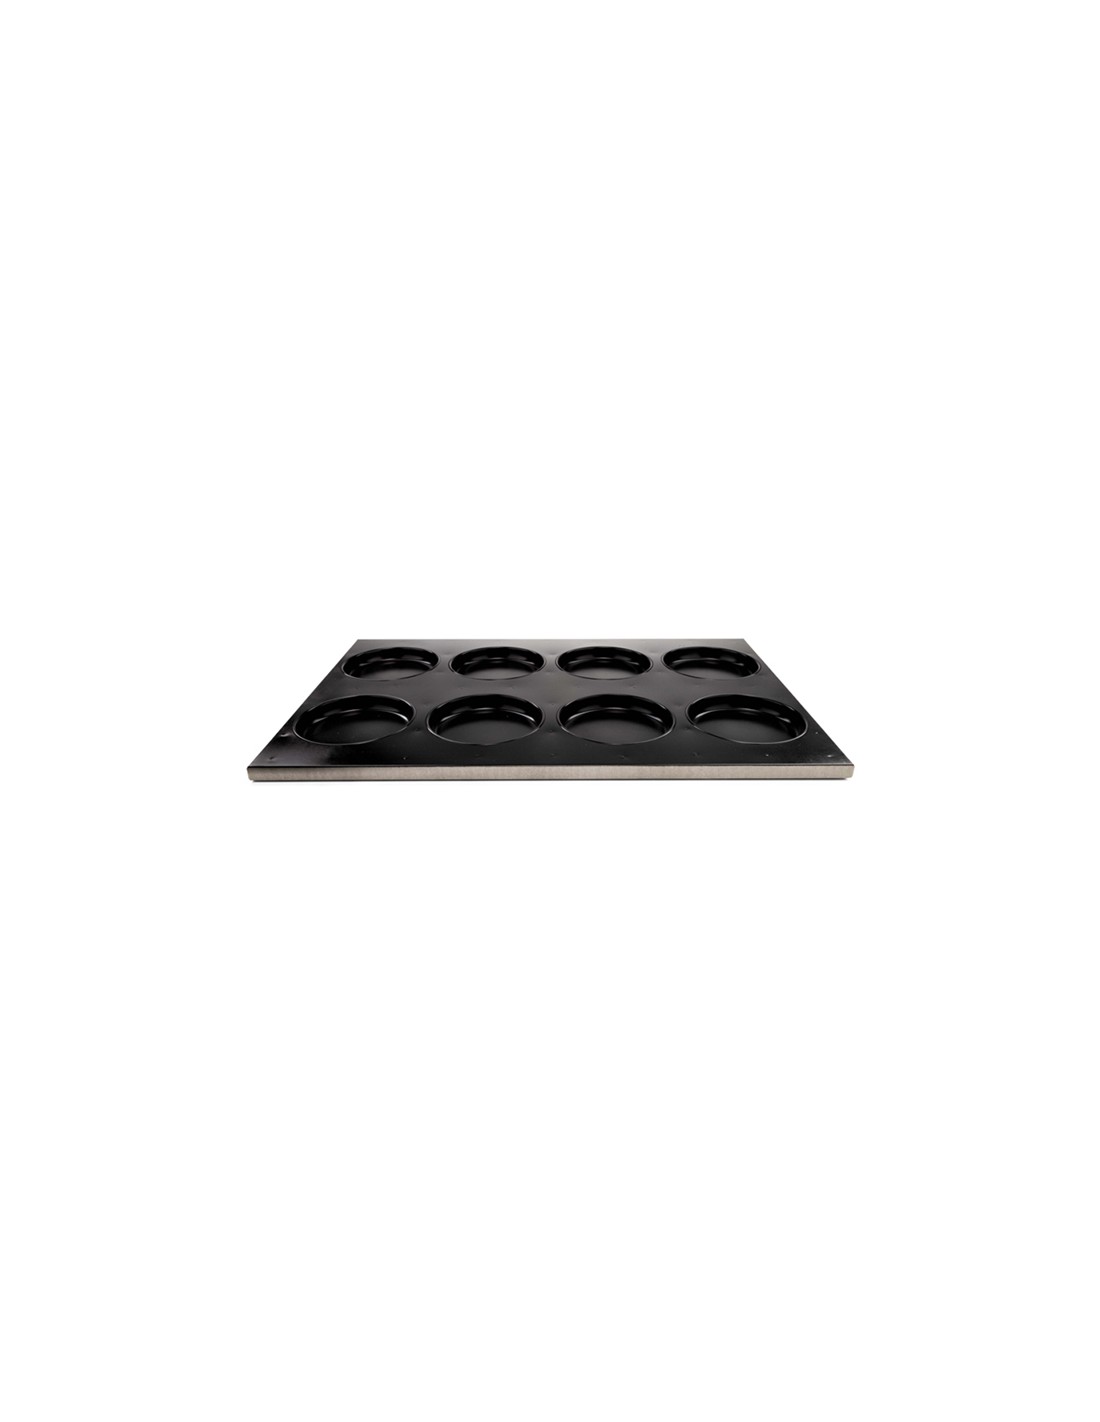 Special baking tray for pastry and eggs - Dimensions cm 60 x 40 x 2 h